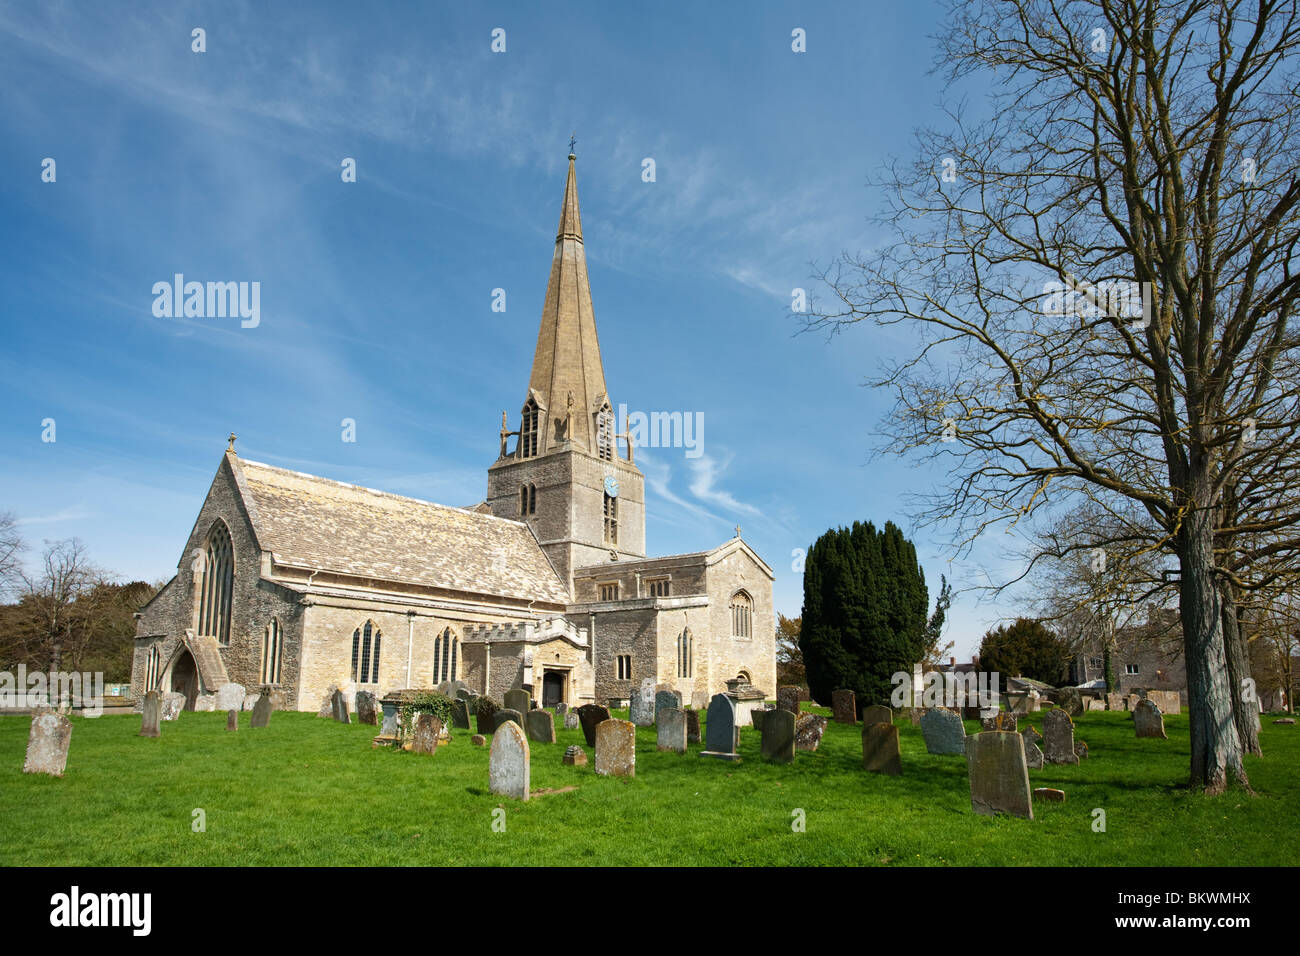 St Marys Church in the Cotswold Village of Bampton, Oxfordshire, Uk Stock Photo